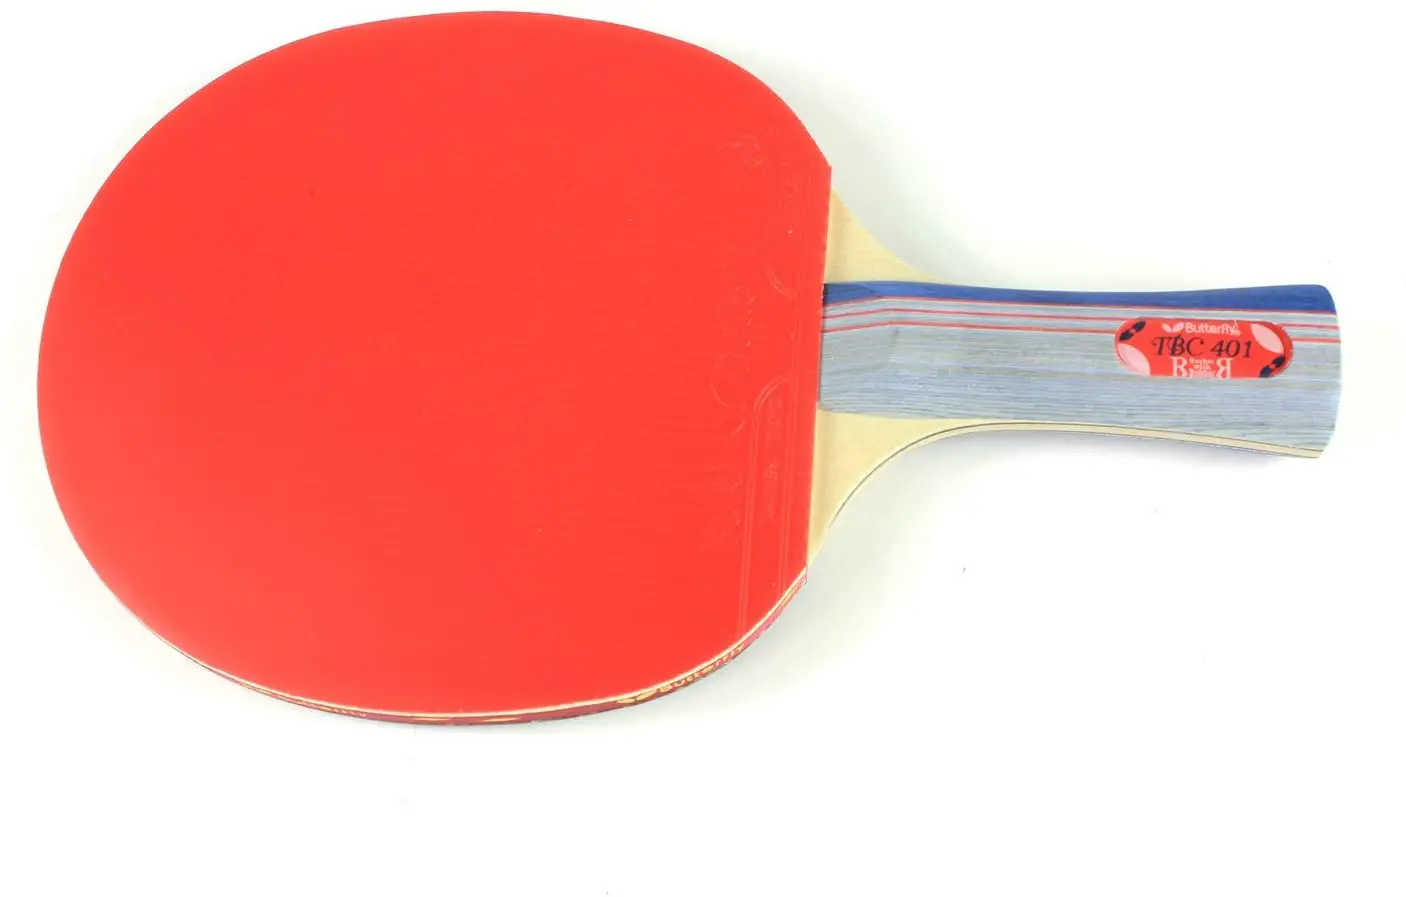 Butterfly 401 Table Tennis Racket